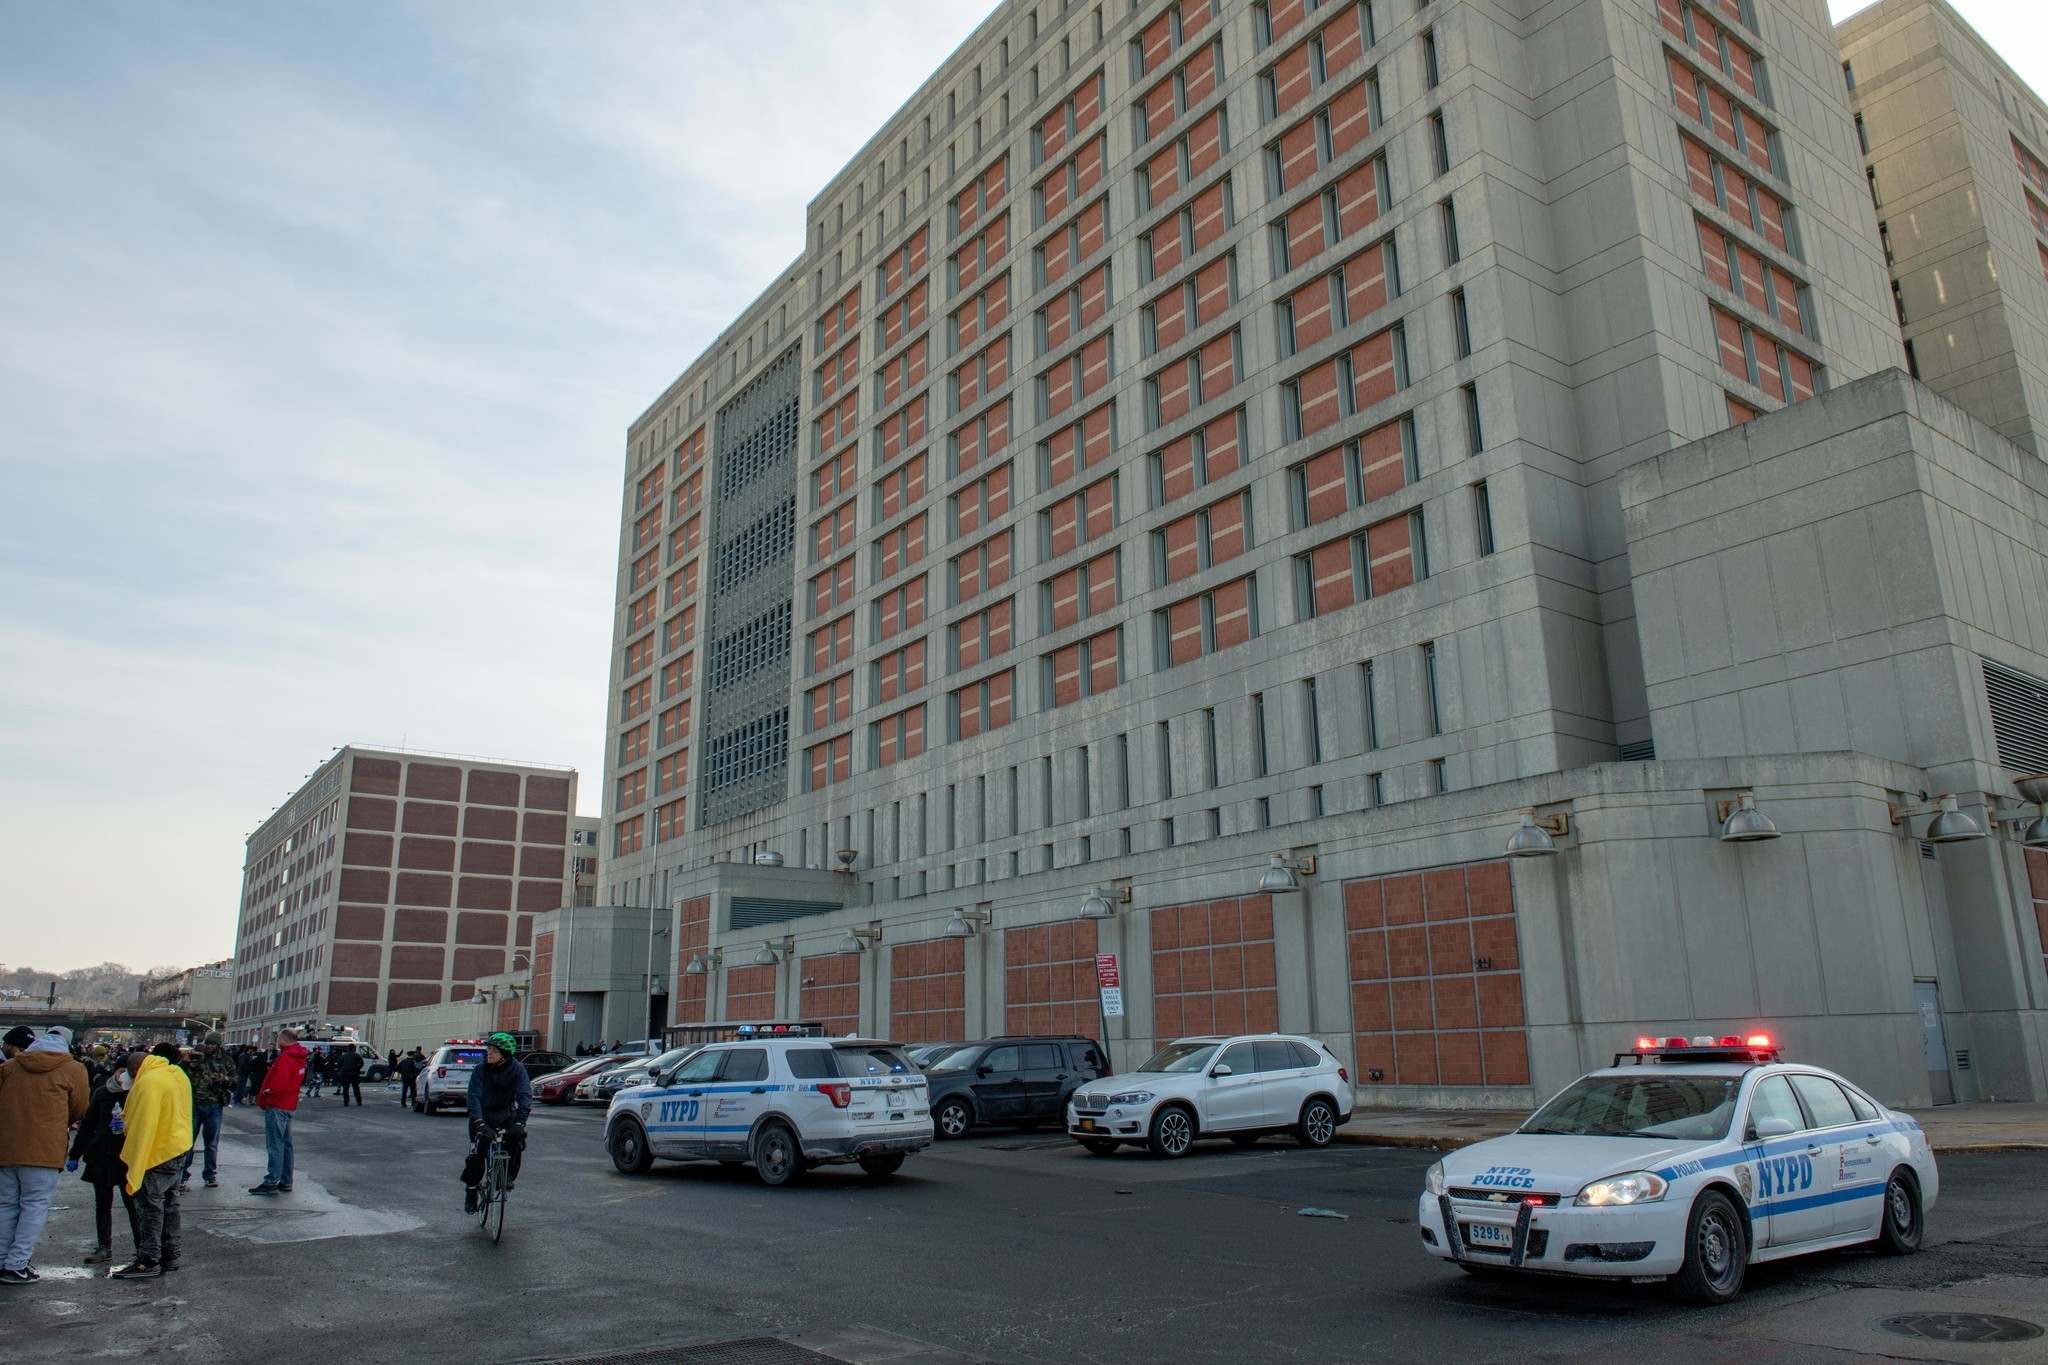 Lawyers demand release of 500-plus 'medically vulnerable’ detainees from Brooklyn jail